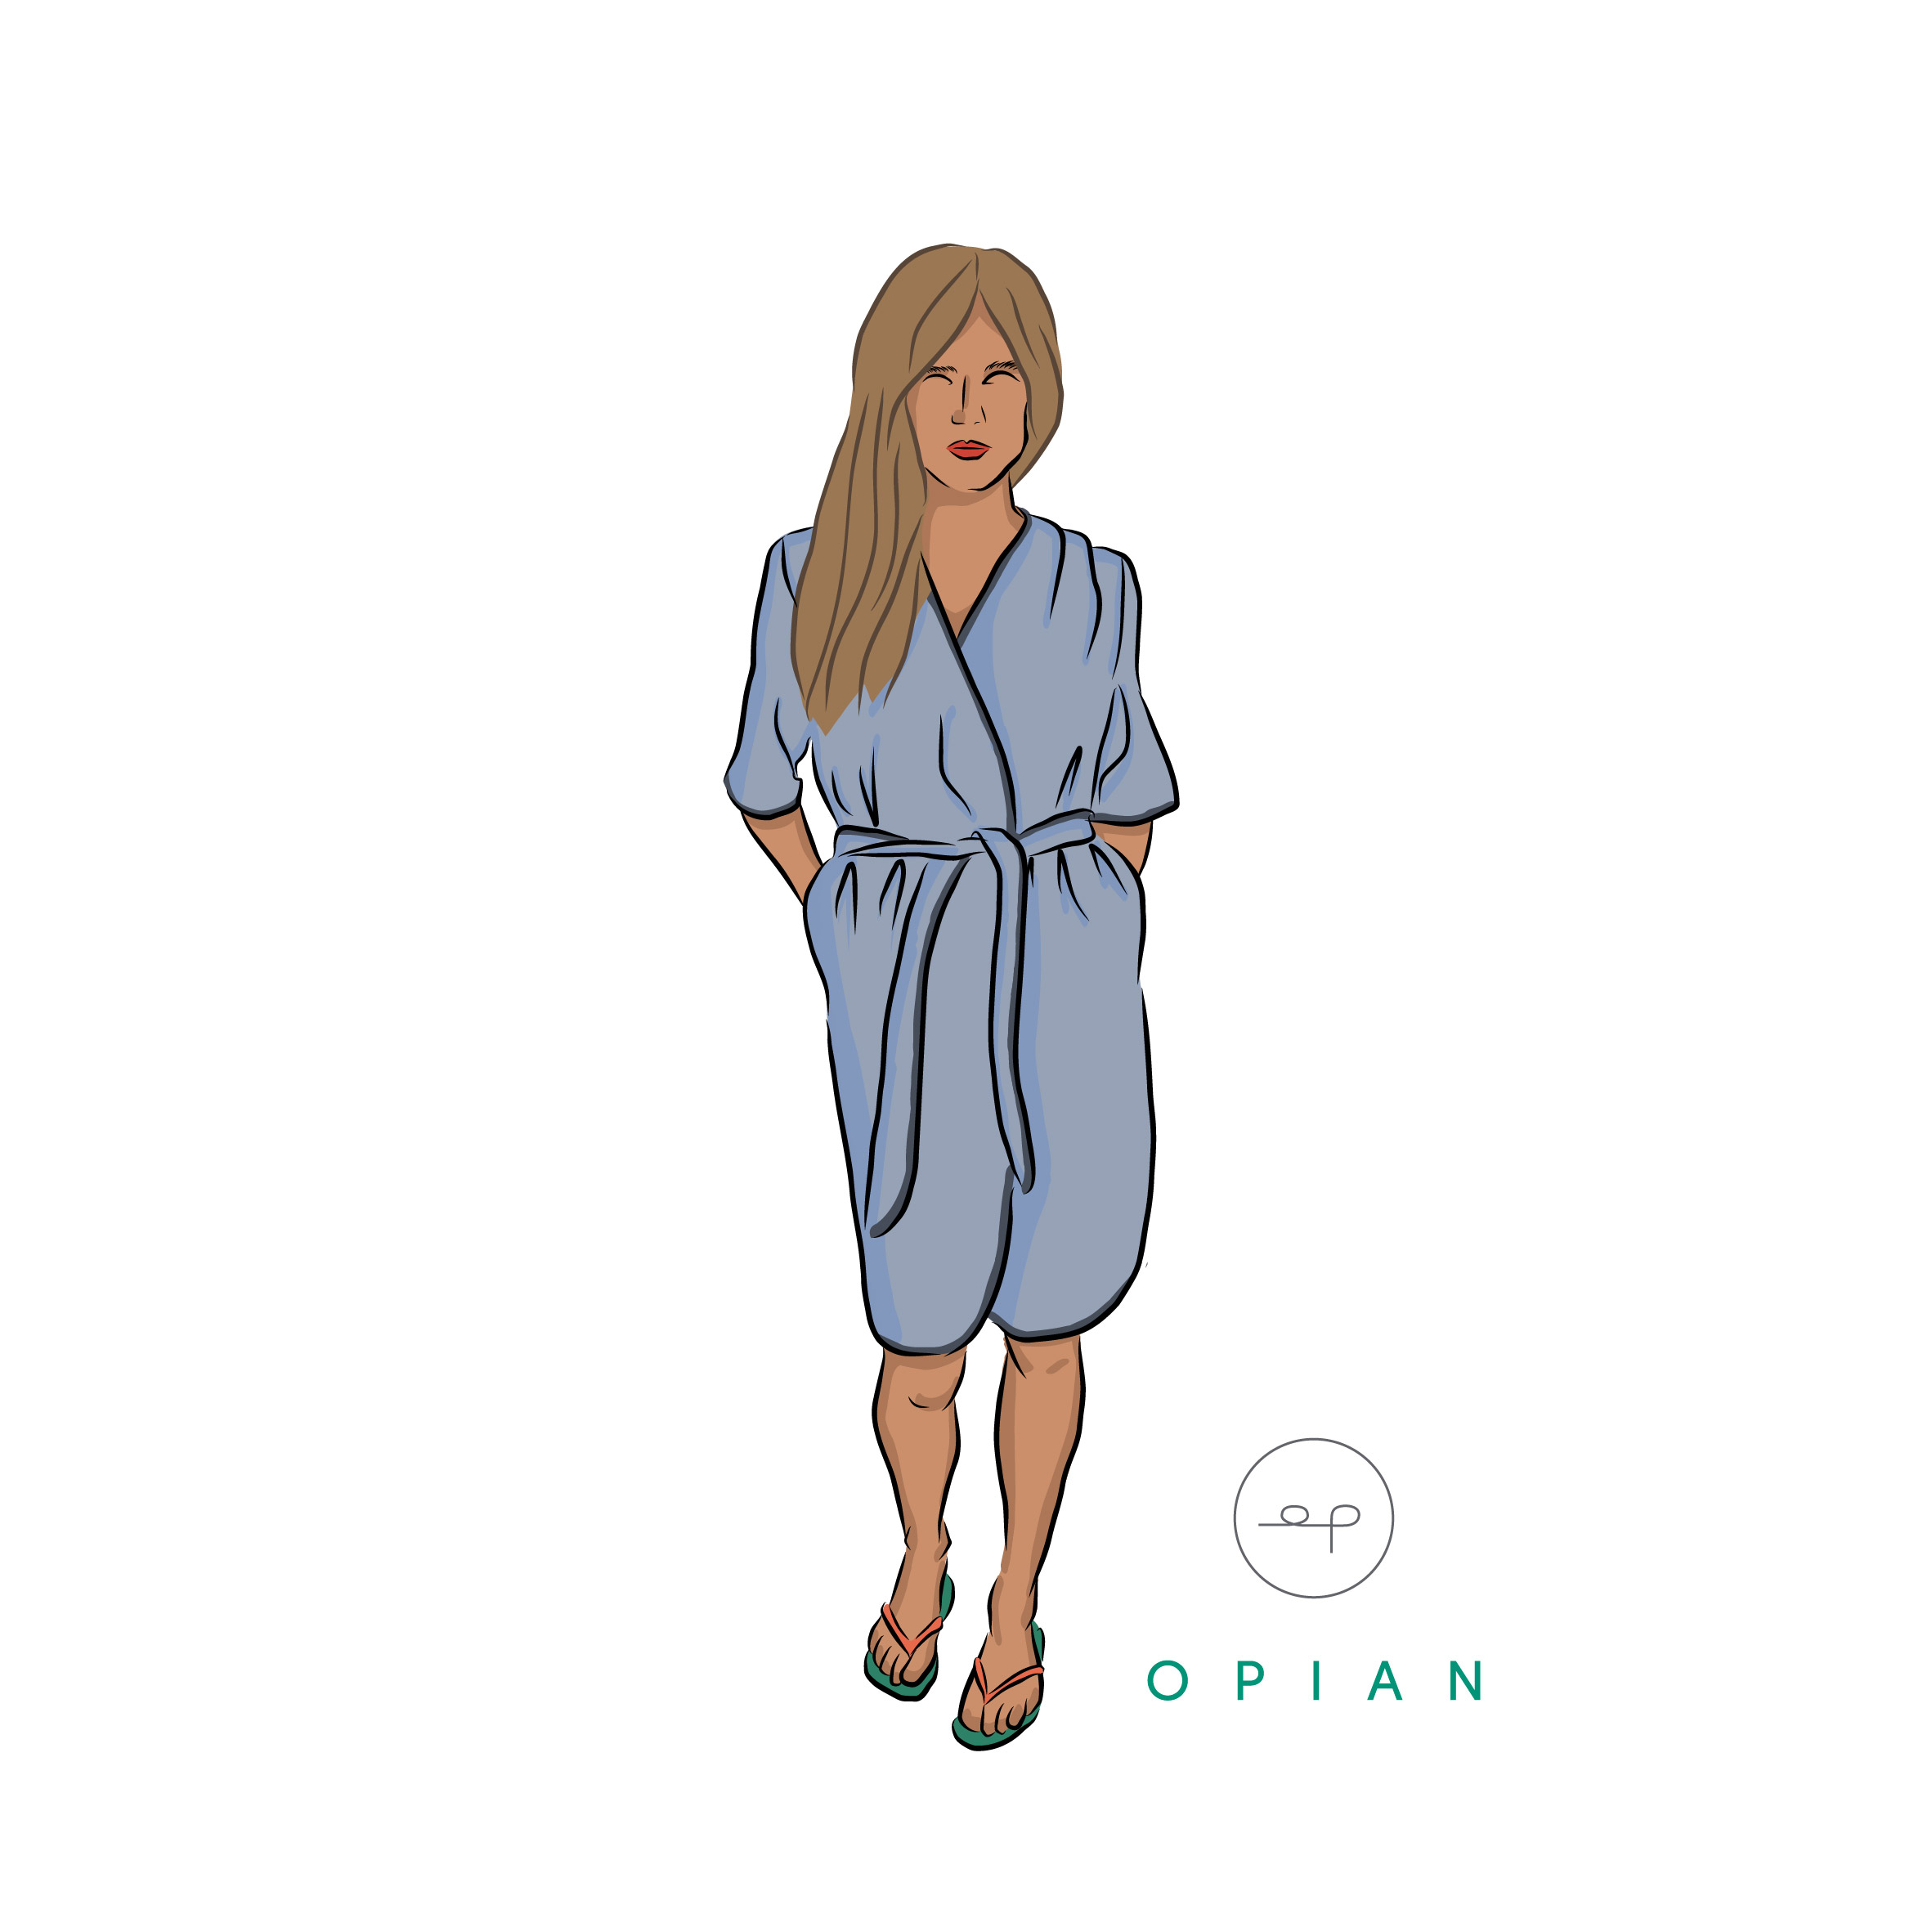 Opian_sewing_Patterns_Hérens_bathrobe_and_dressing_gown